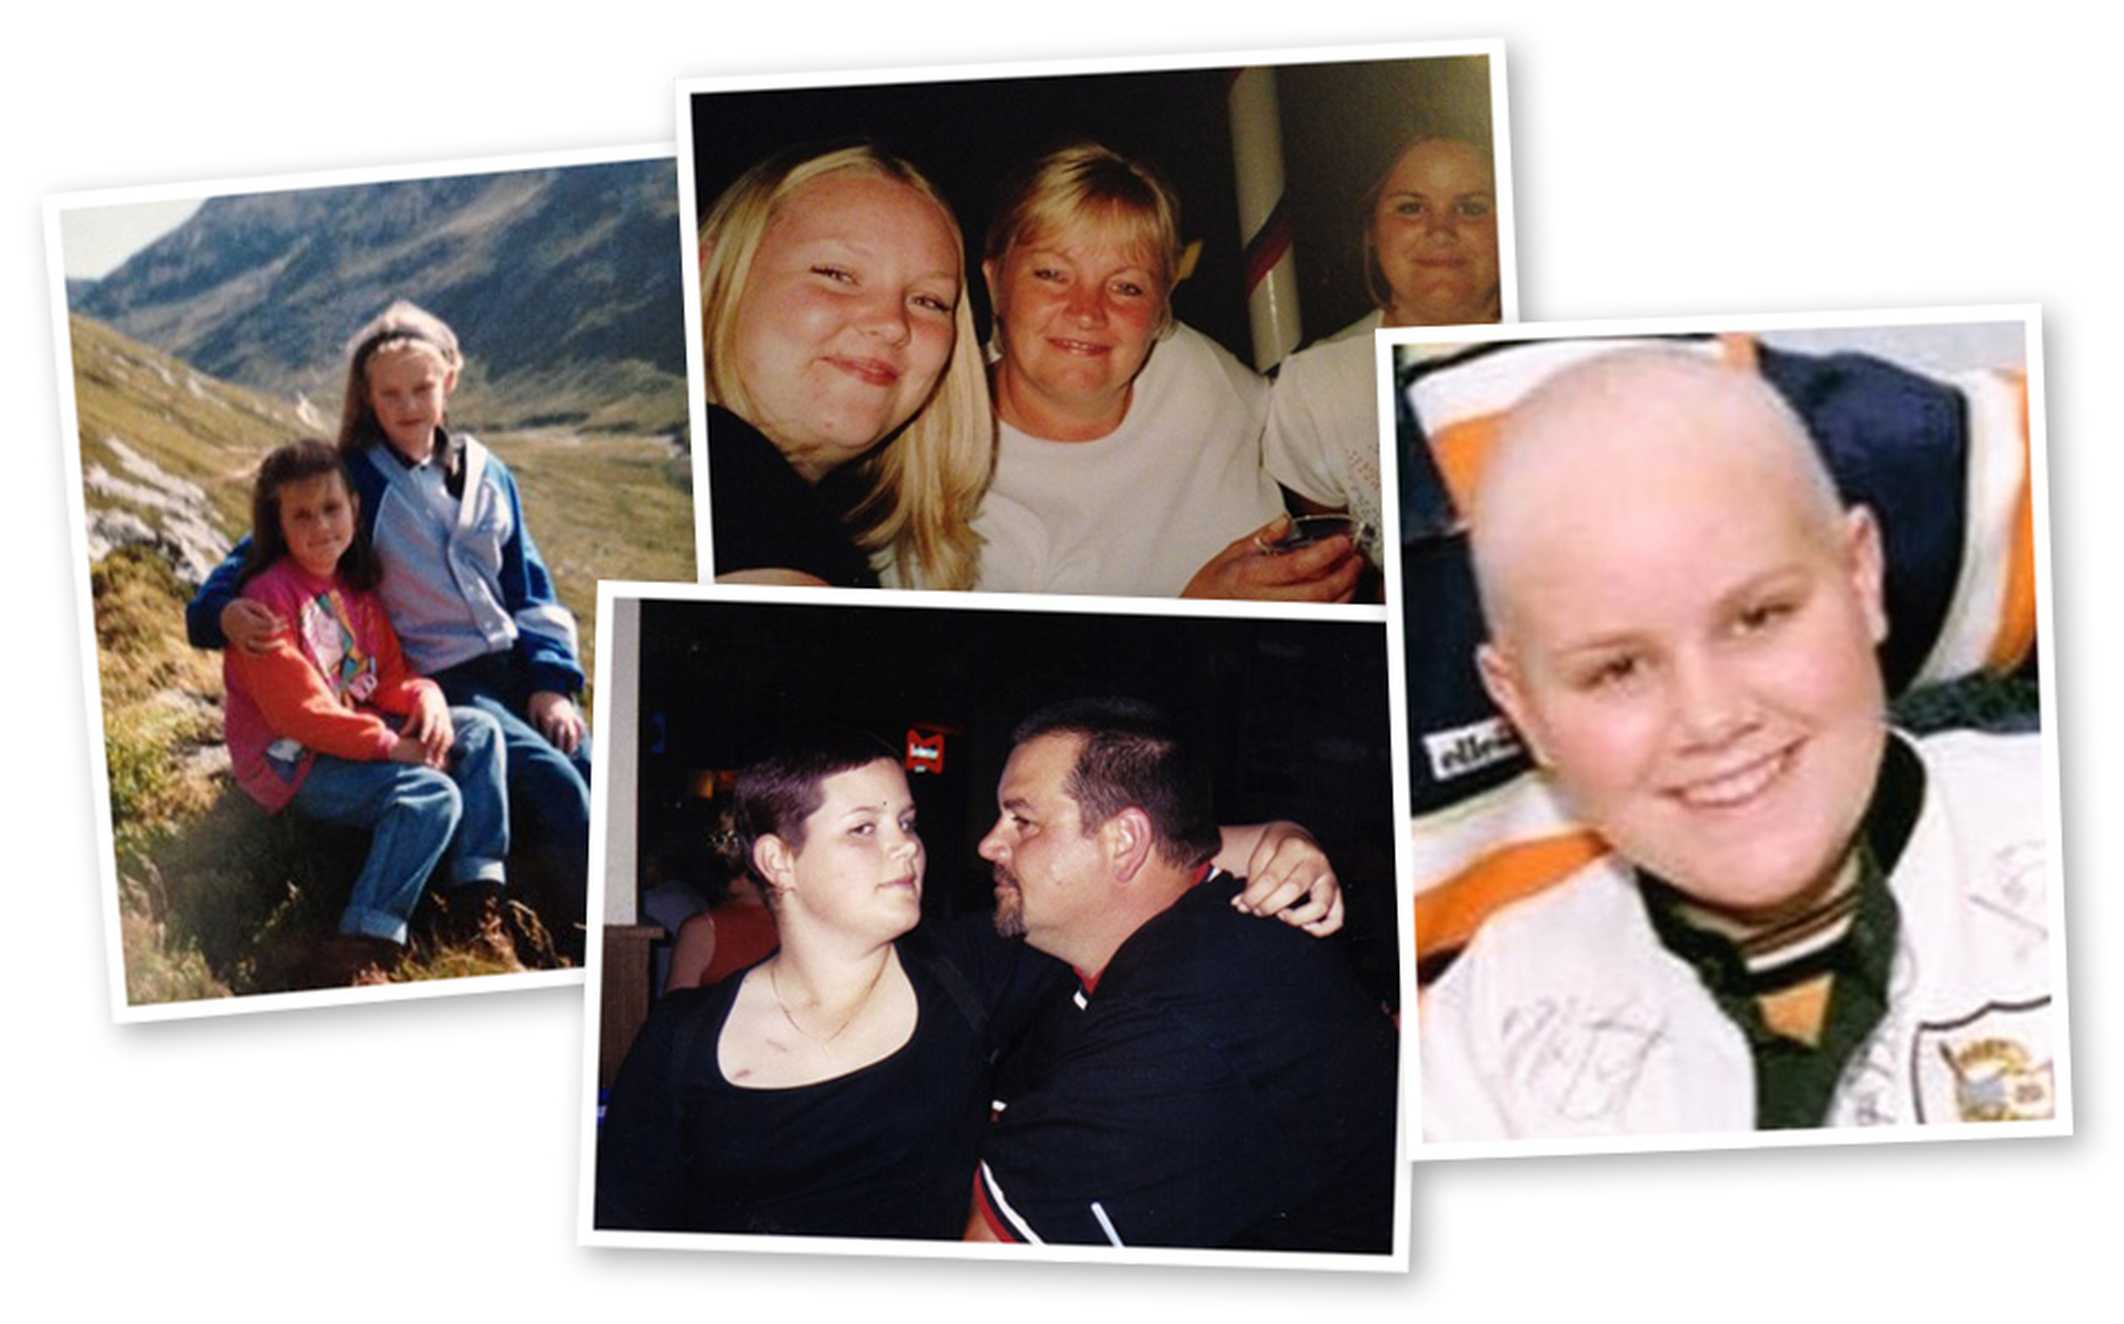 A collage of photos showing Regional Fundraising Manager, Nikki with various family members